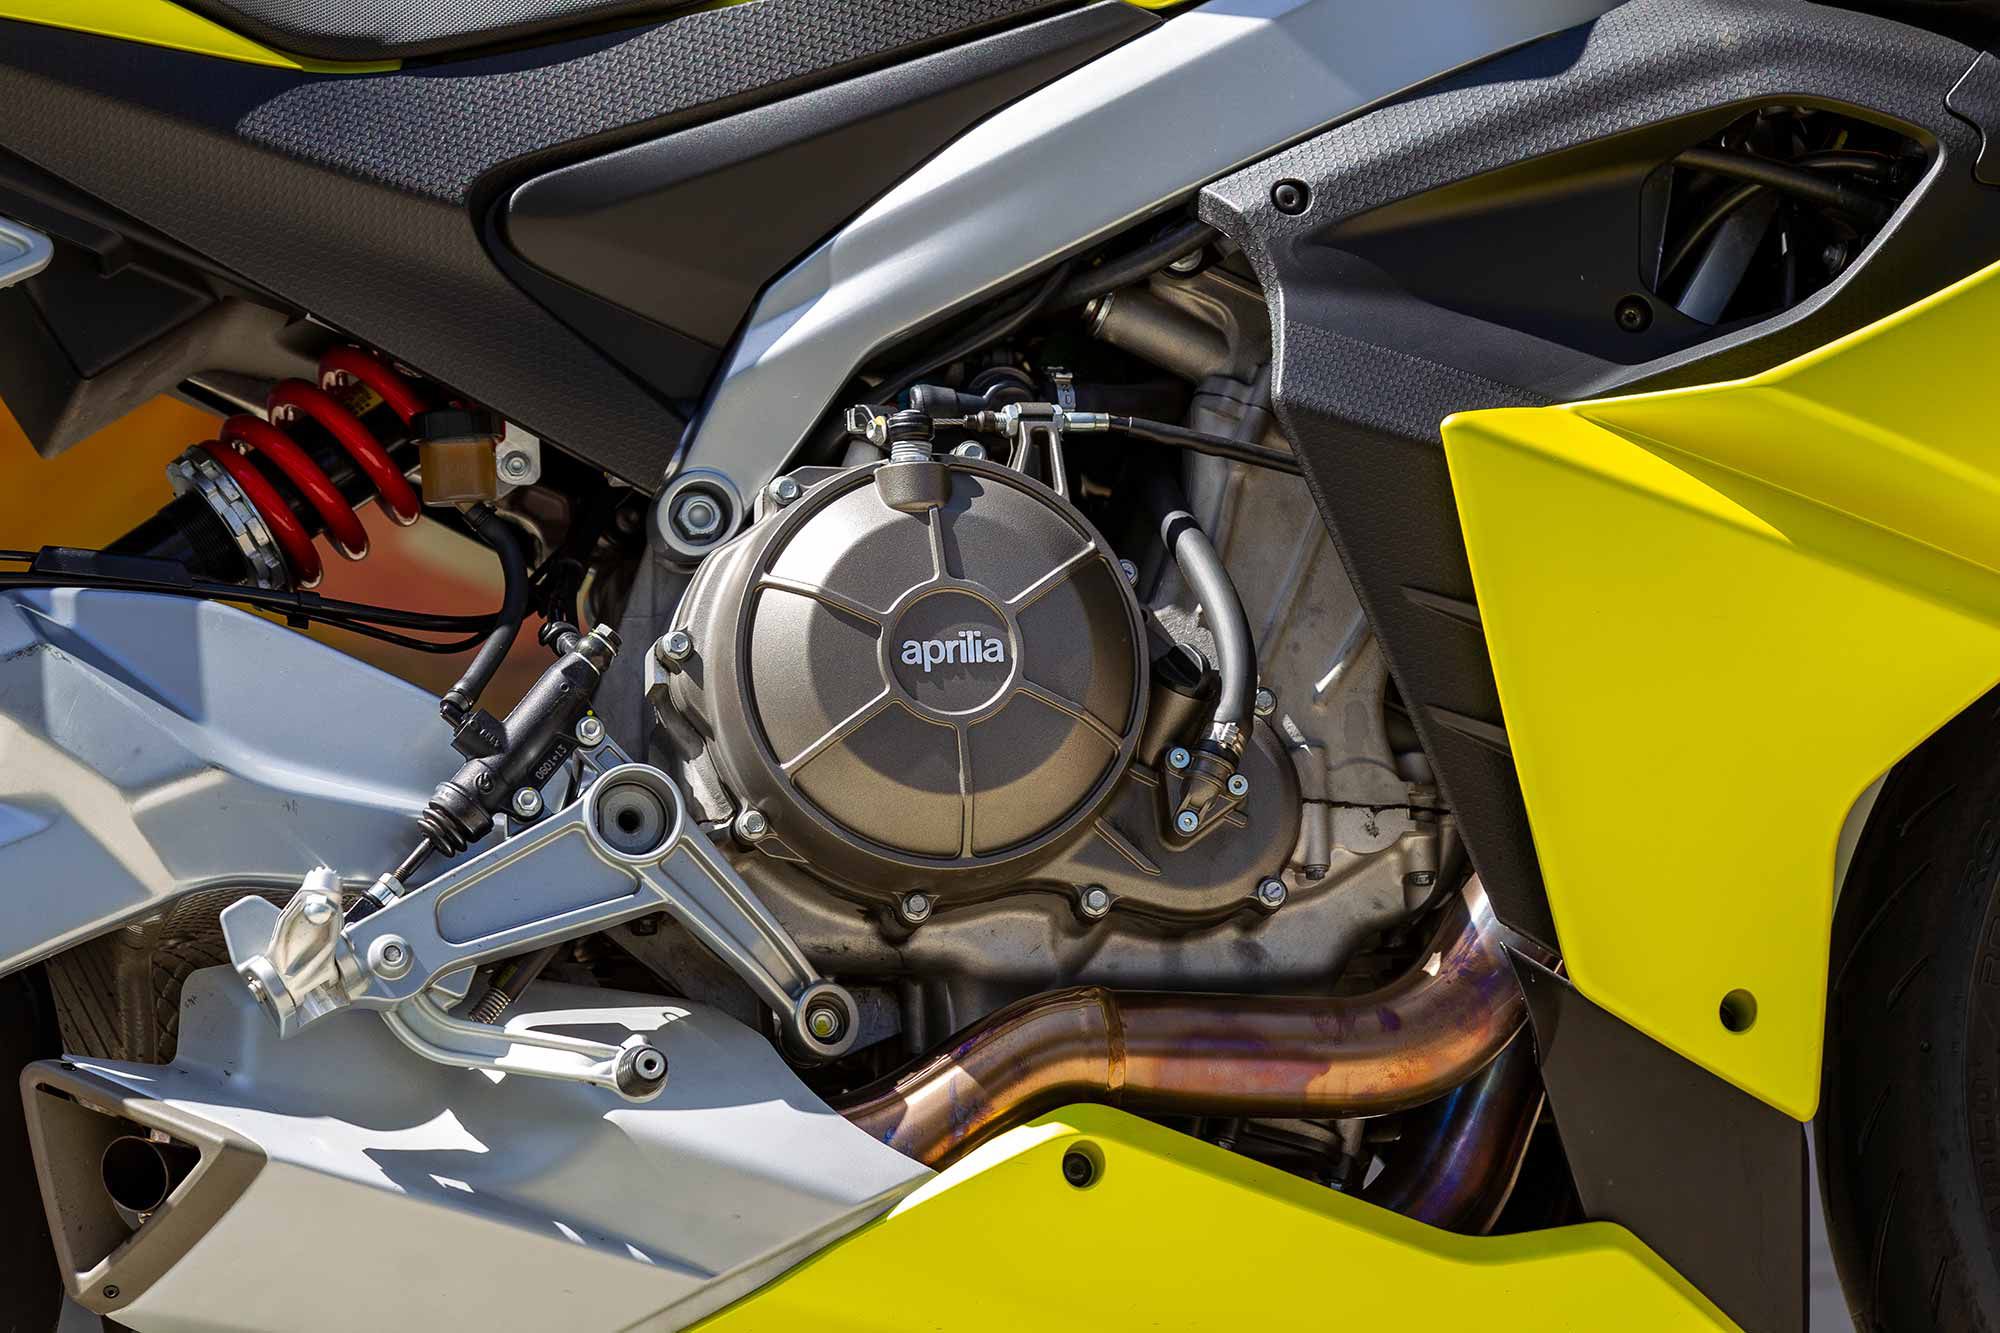 The RS 660 is powered by the same 659cc parallel-twin engine also utilized in Aprilia’s Tuono 660 and Touareg 660. Placed on the <i>Motorcyclist</i> dyno, it ripped out nearly 90 horsepower and 45 pound-feet of torque at the rear wheel.